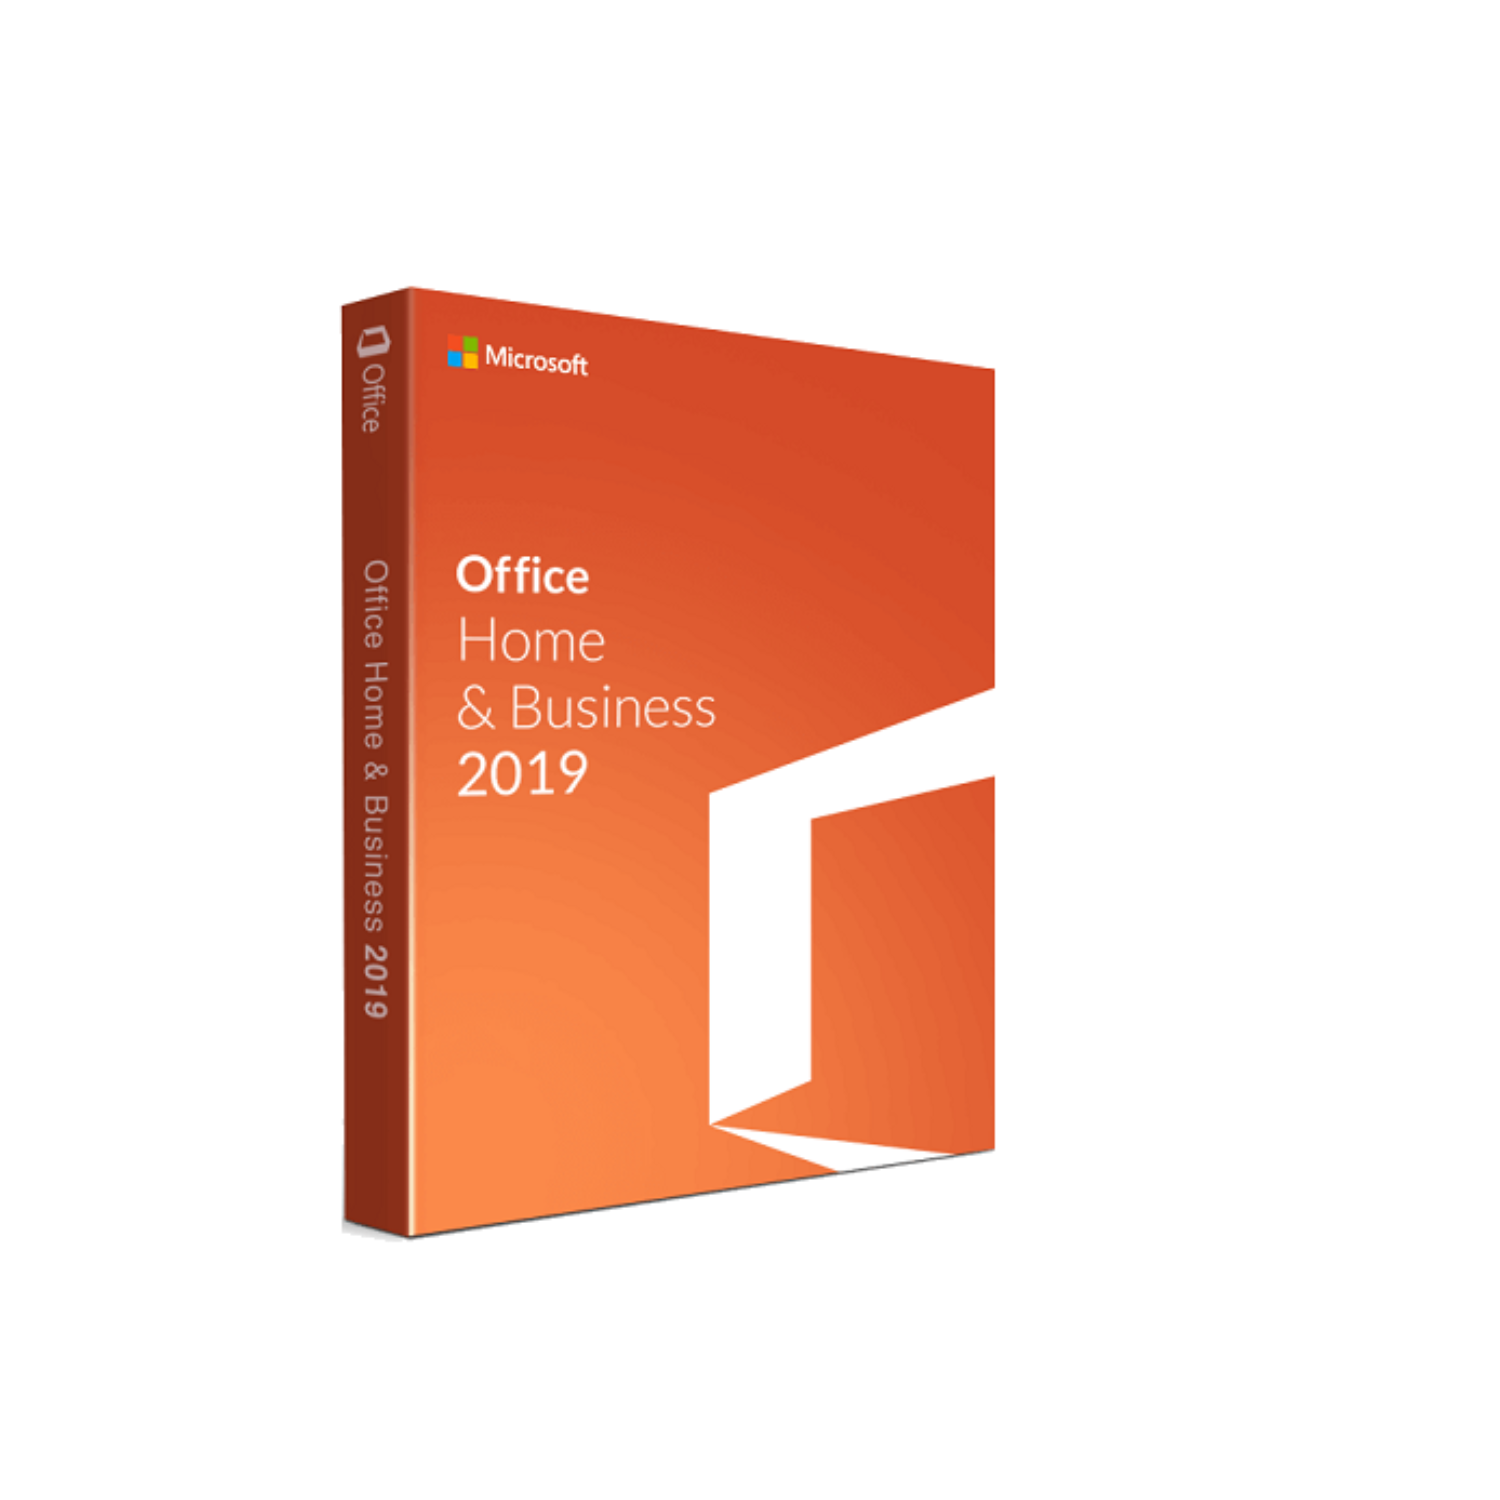 Office 2019 Home & Business